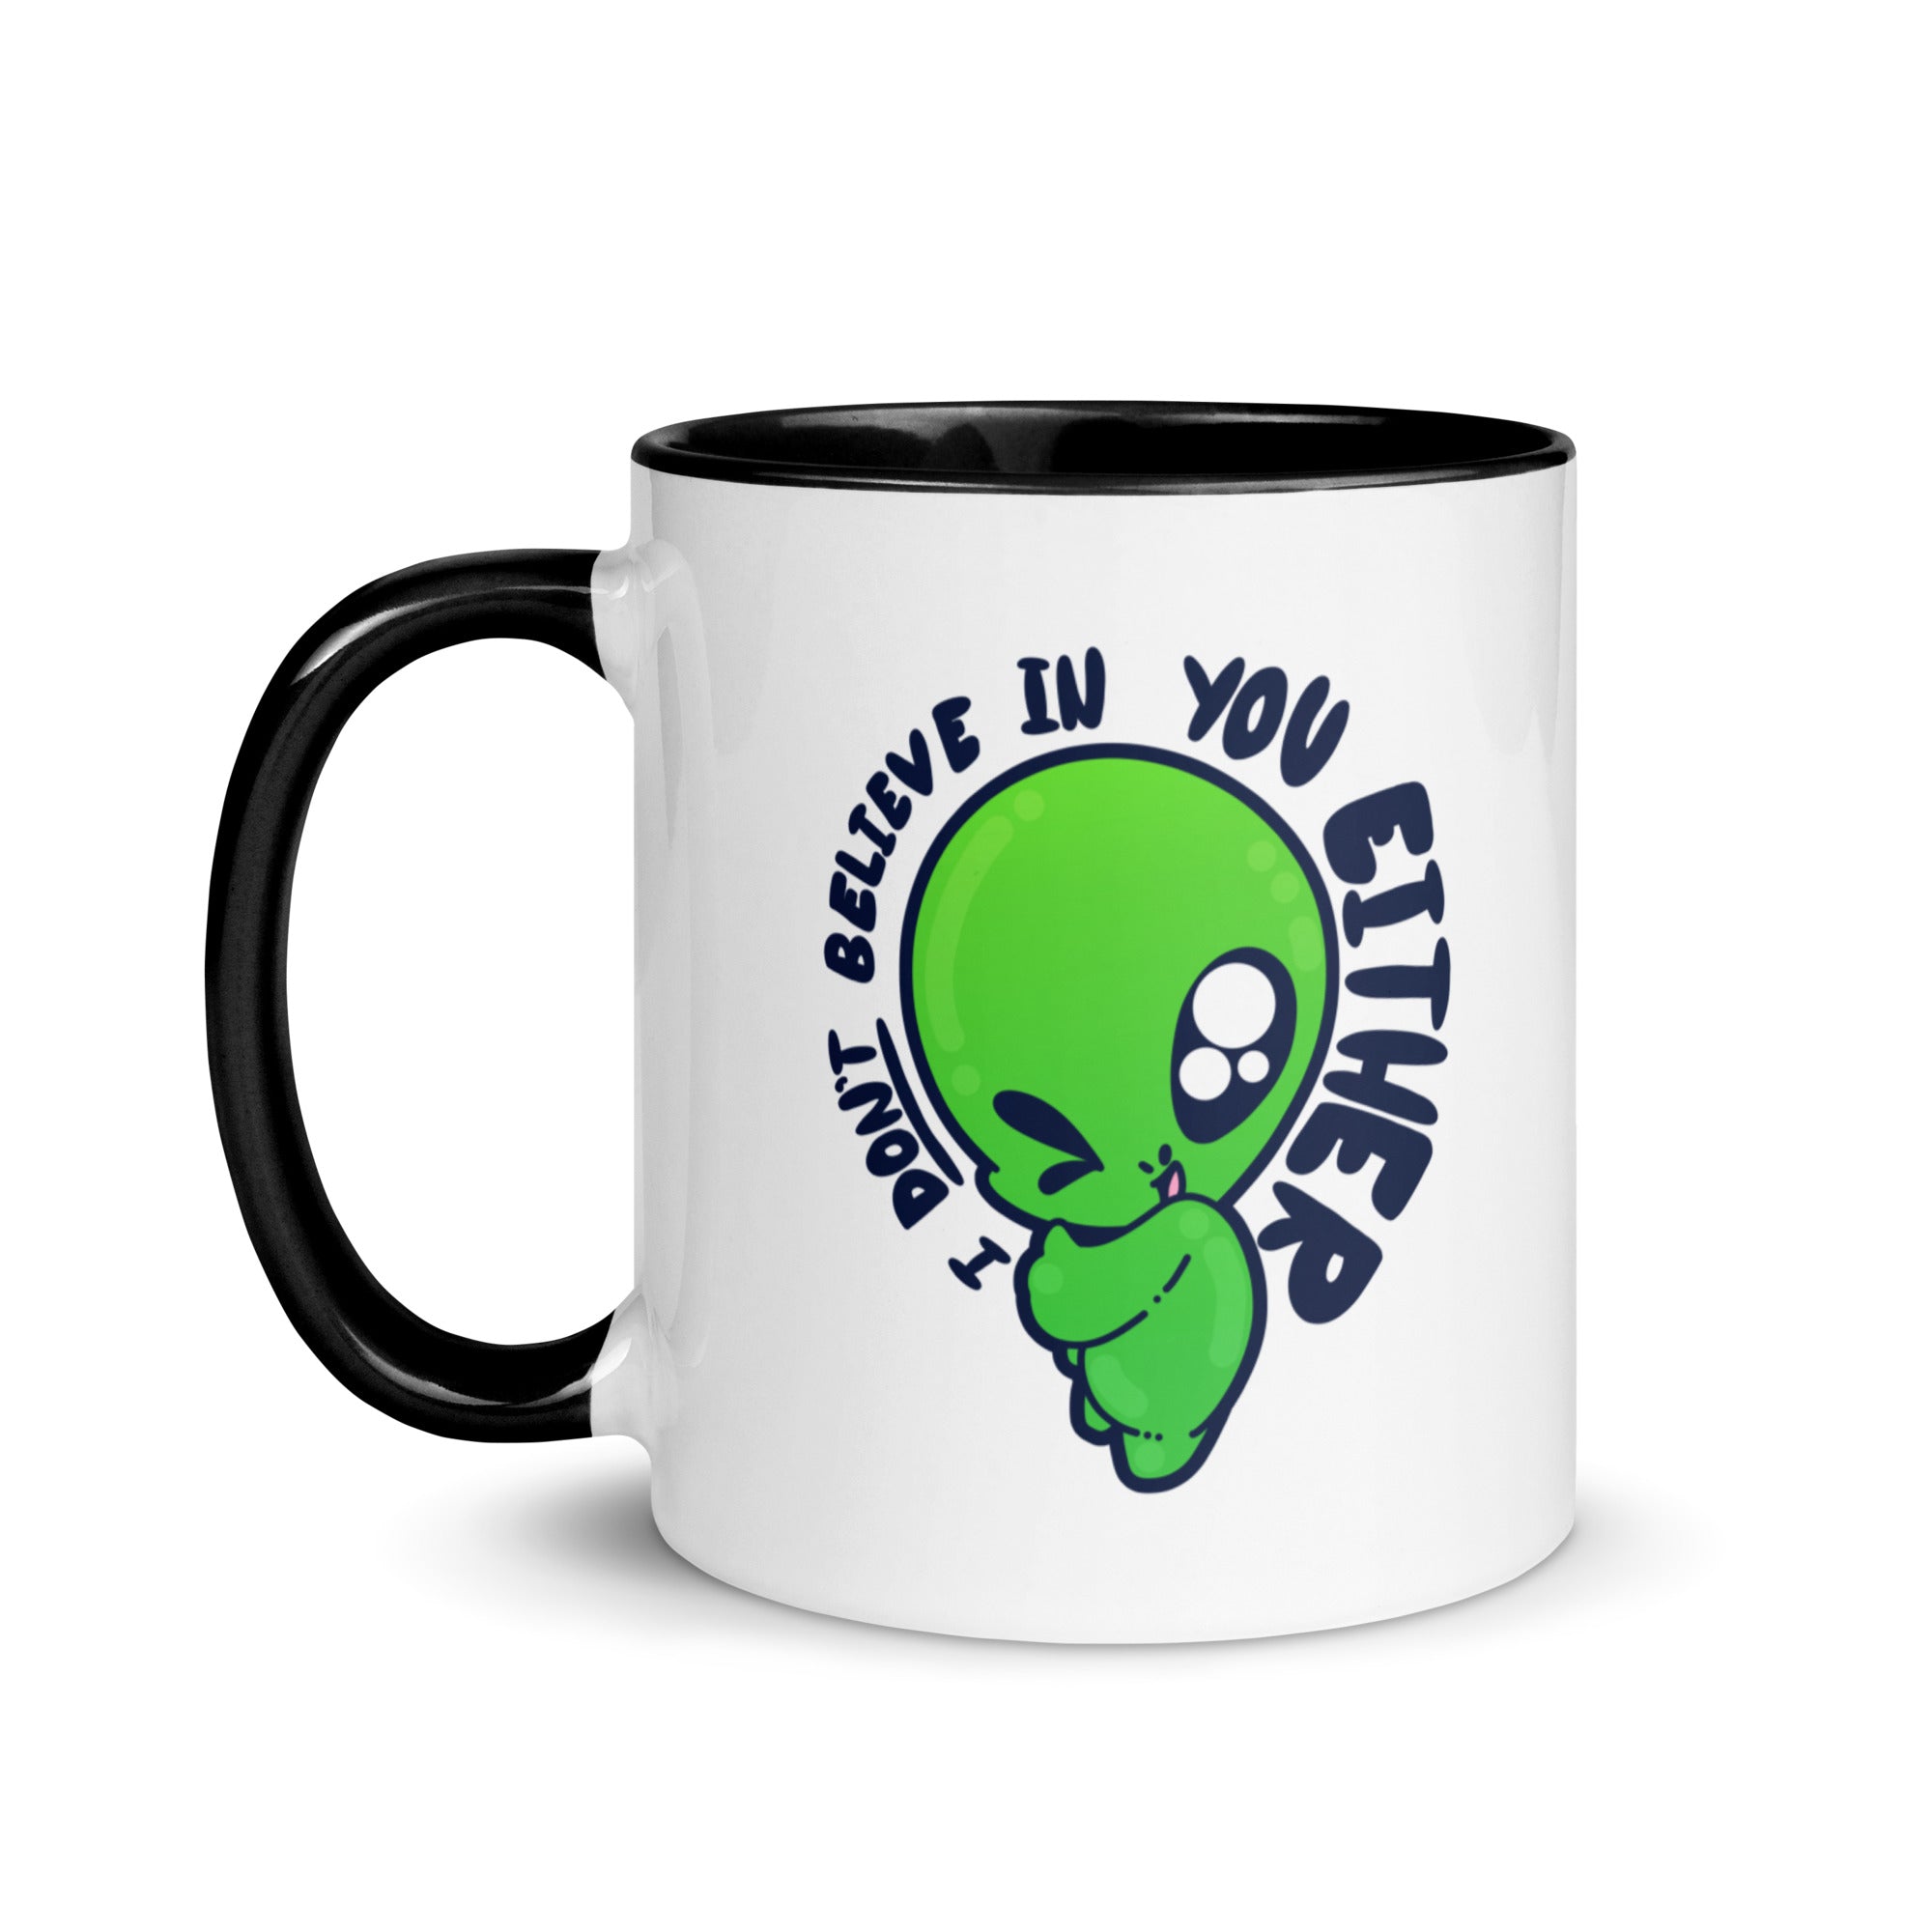 I DONT BELIEVE IN YOU EITHER - Mug with Color Inside - ChubbleGumLLC